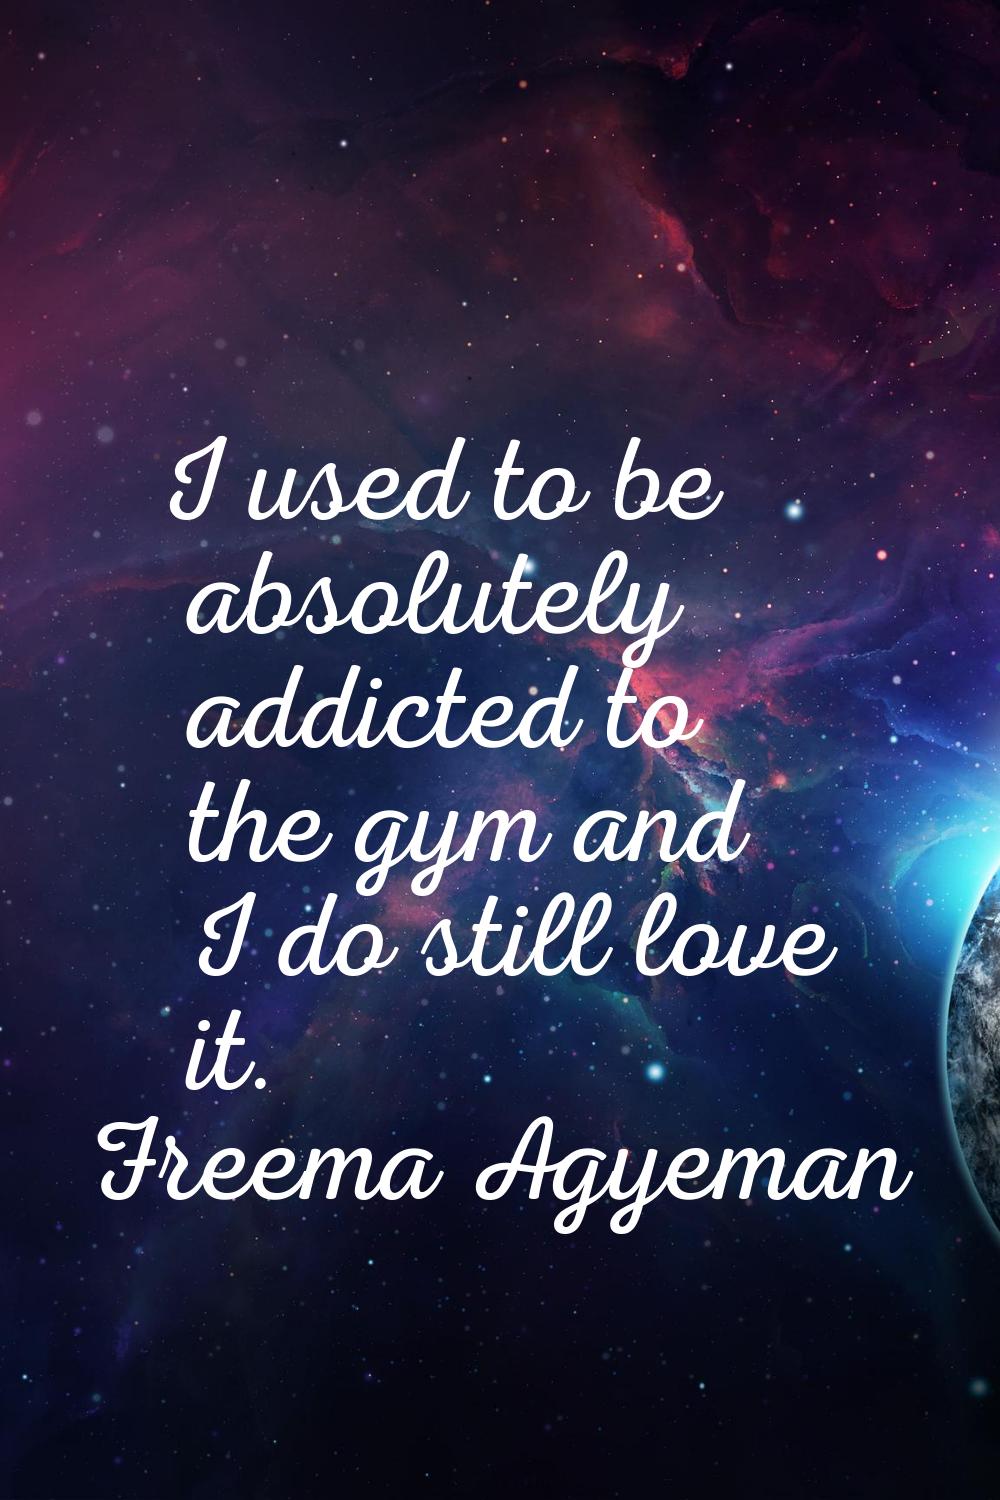 I used to be absolutely addicted to the gym and I do still love it.